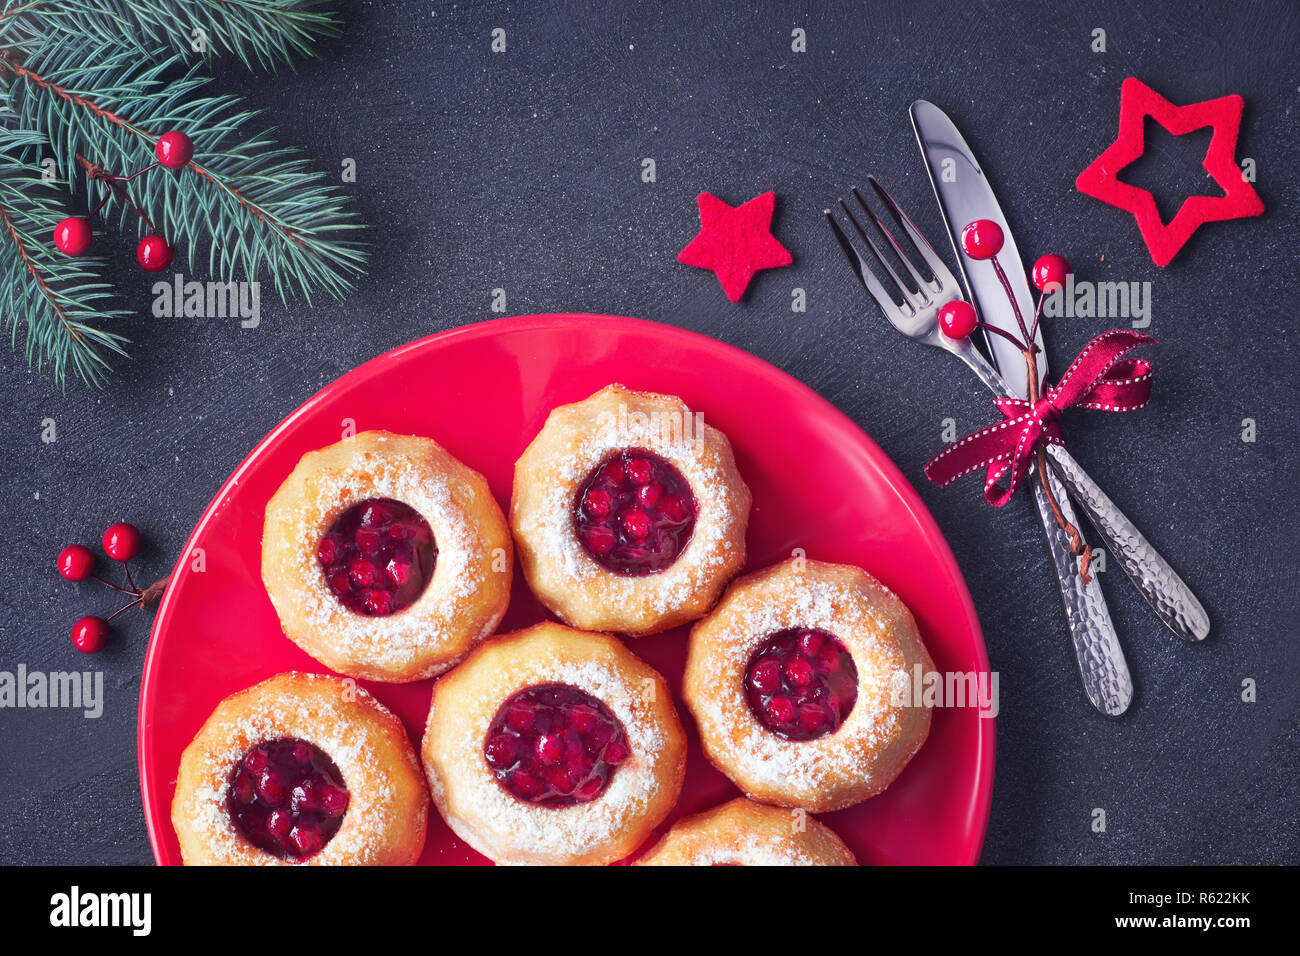 Mini bundt ring cakes with red whortleberry jam on dark background with fir twigs and berries. Christmas holiday sweet food. Stock Photo